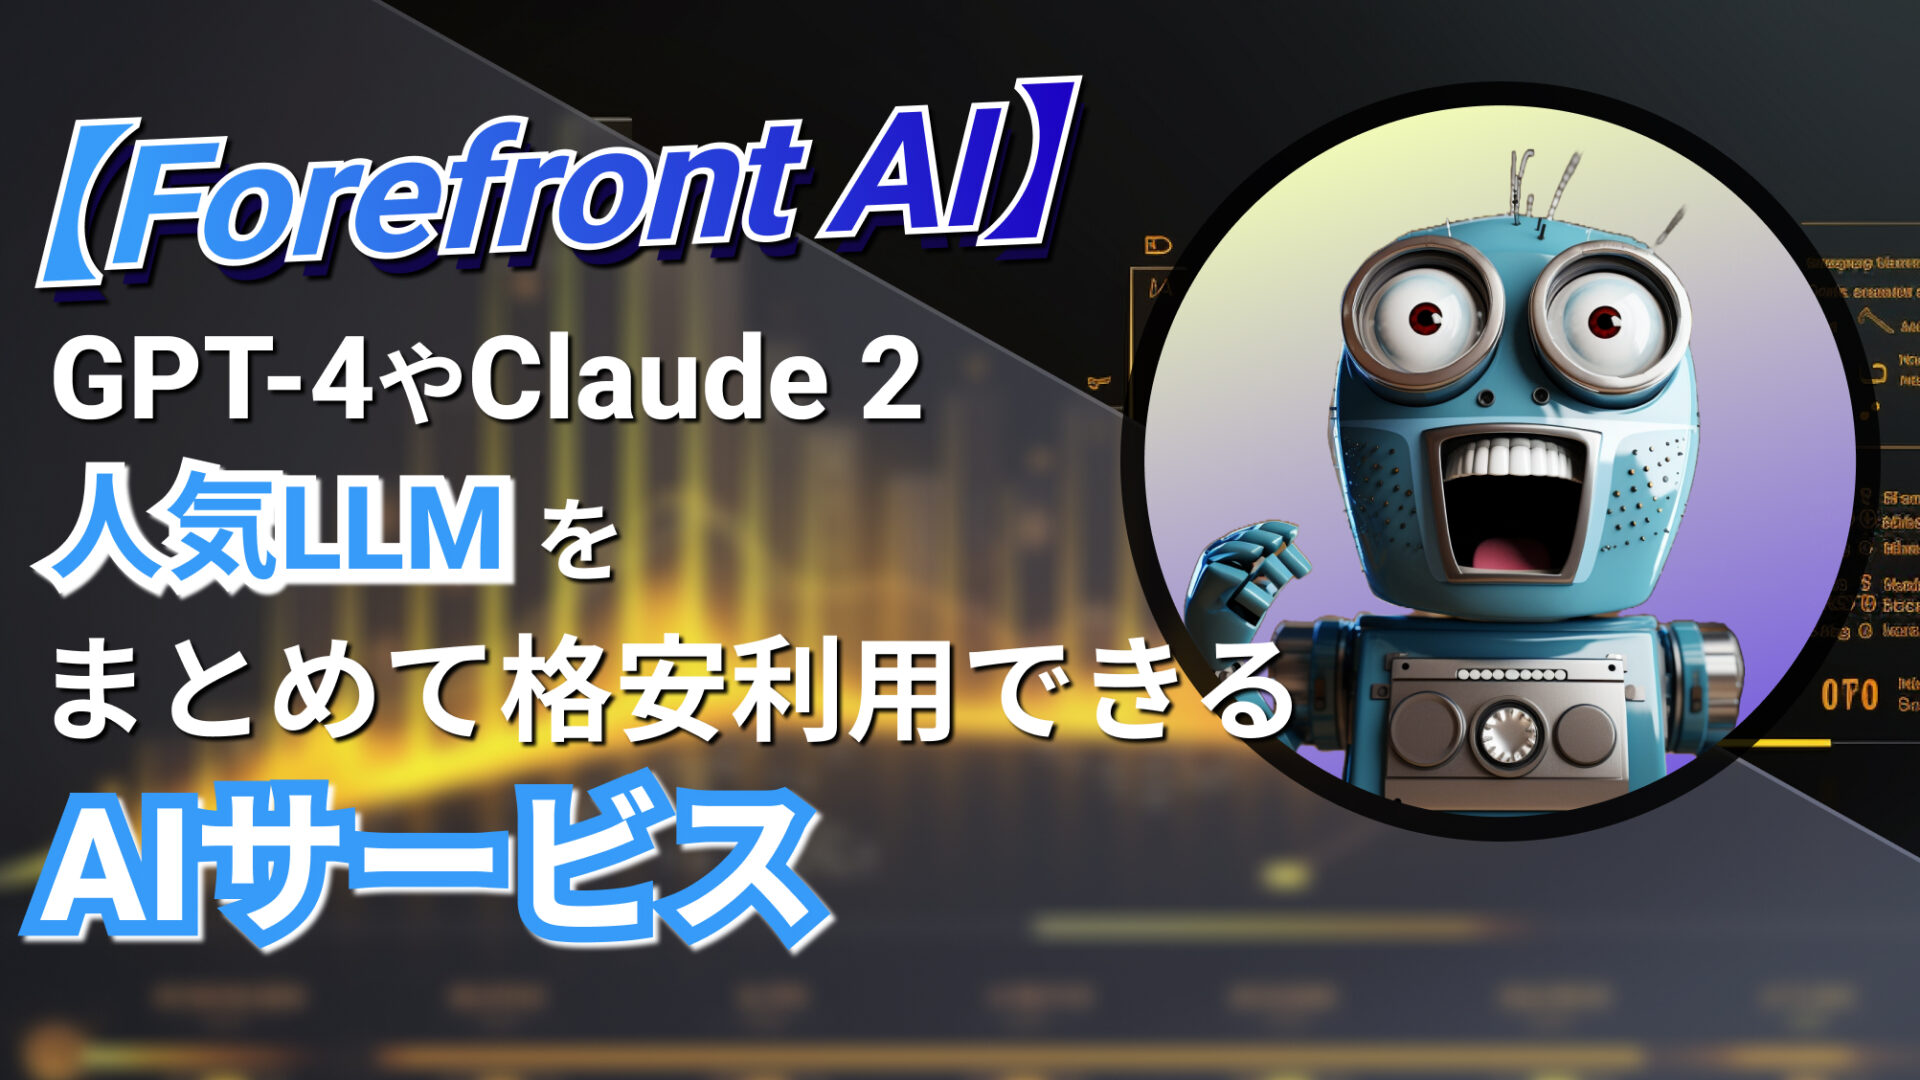 Forefront AI GPT-4 Claude-2 AIサービス